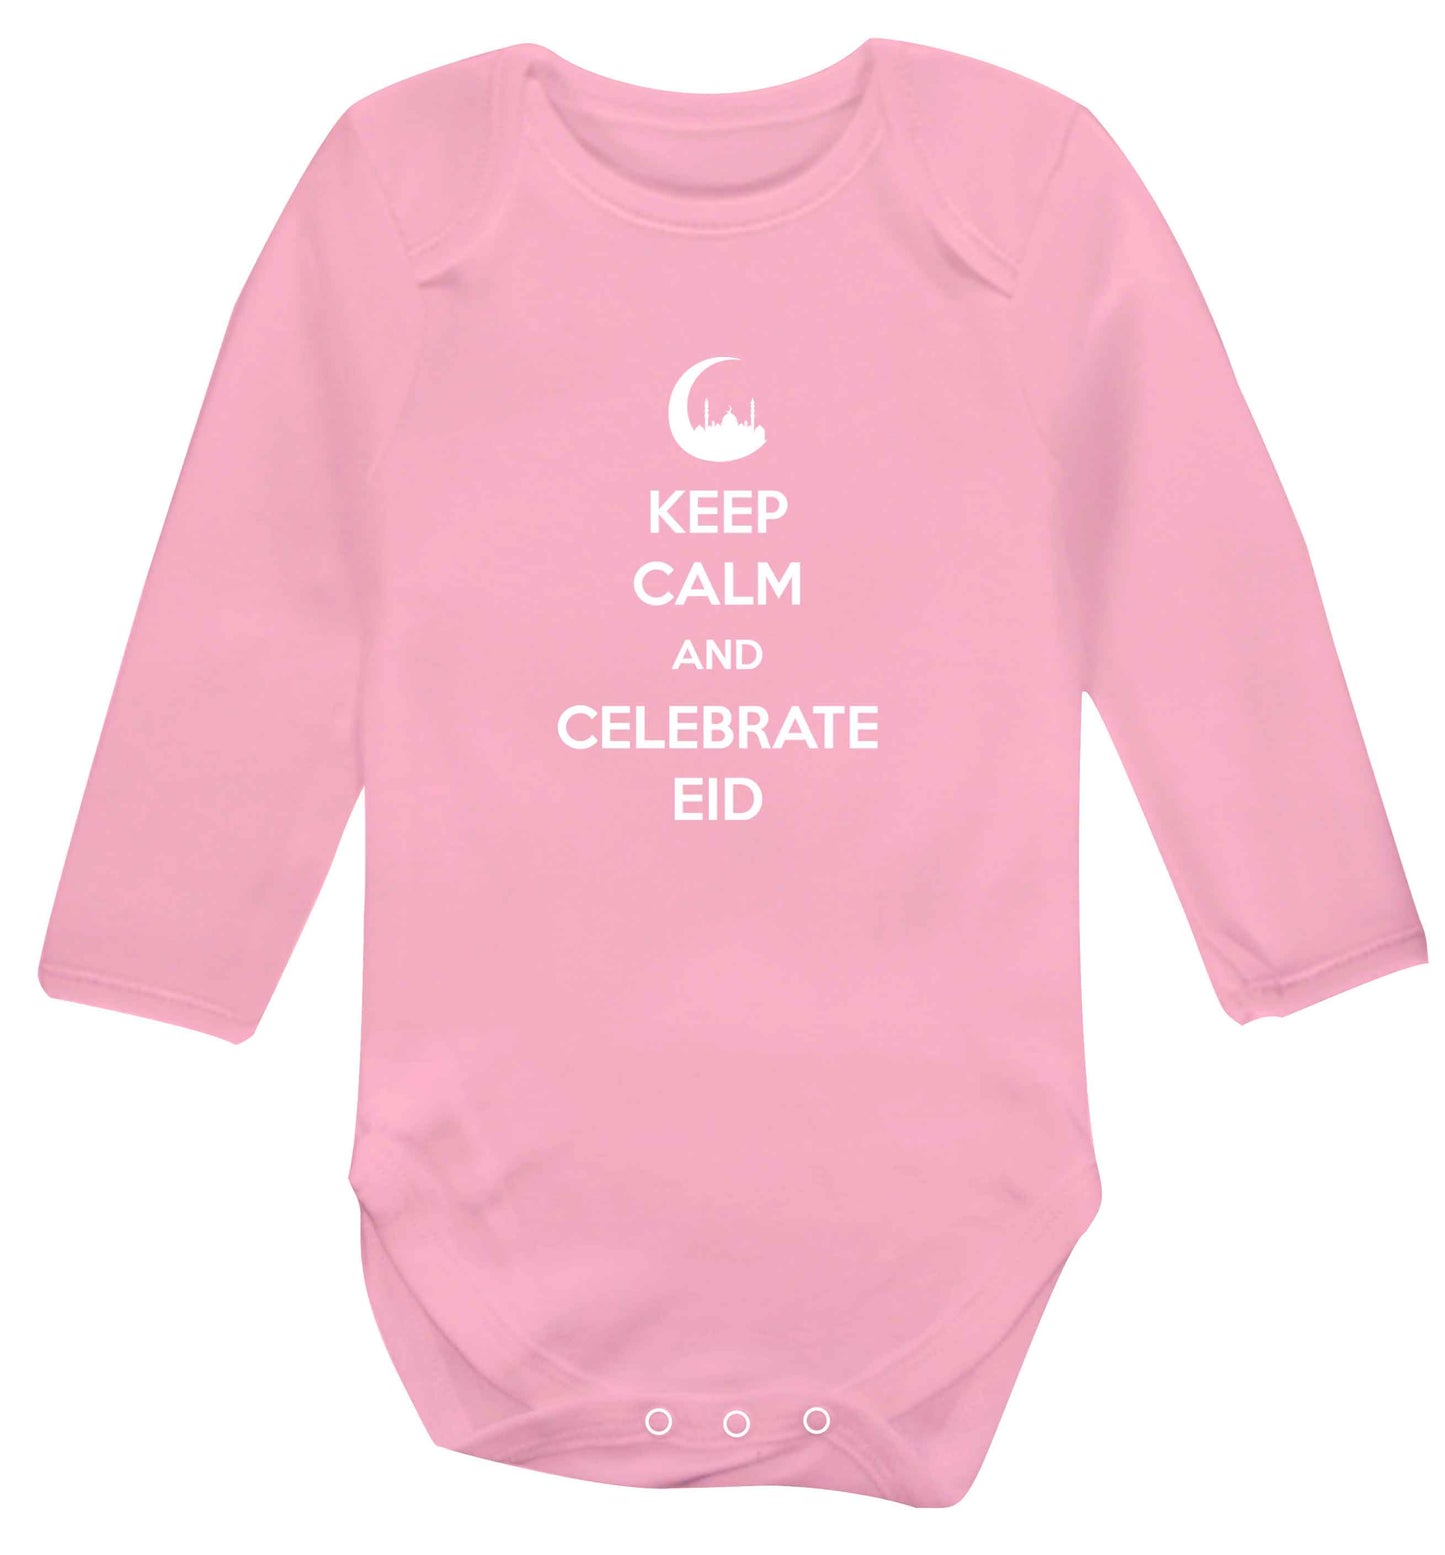 Keep calm and celebrate Eid baby vest long sleeved pale pink 6-12 months